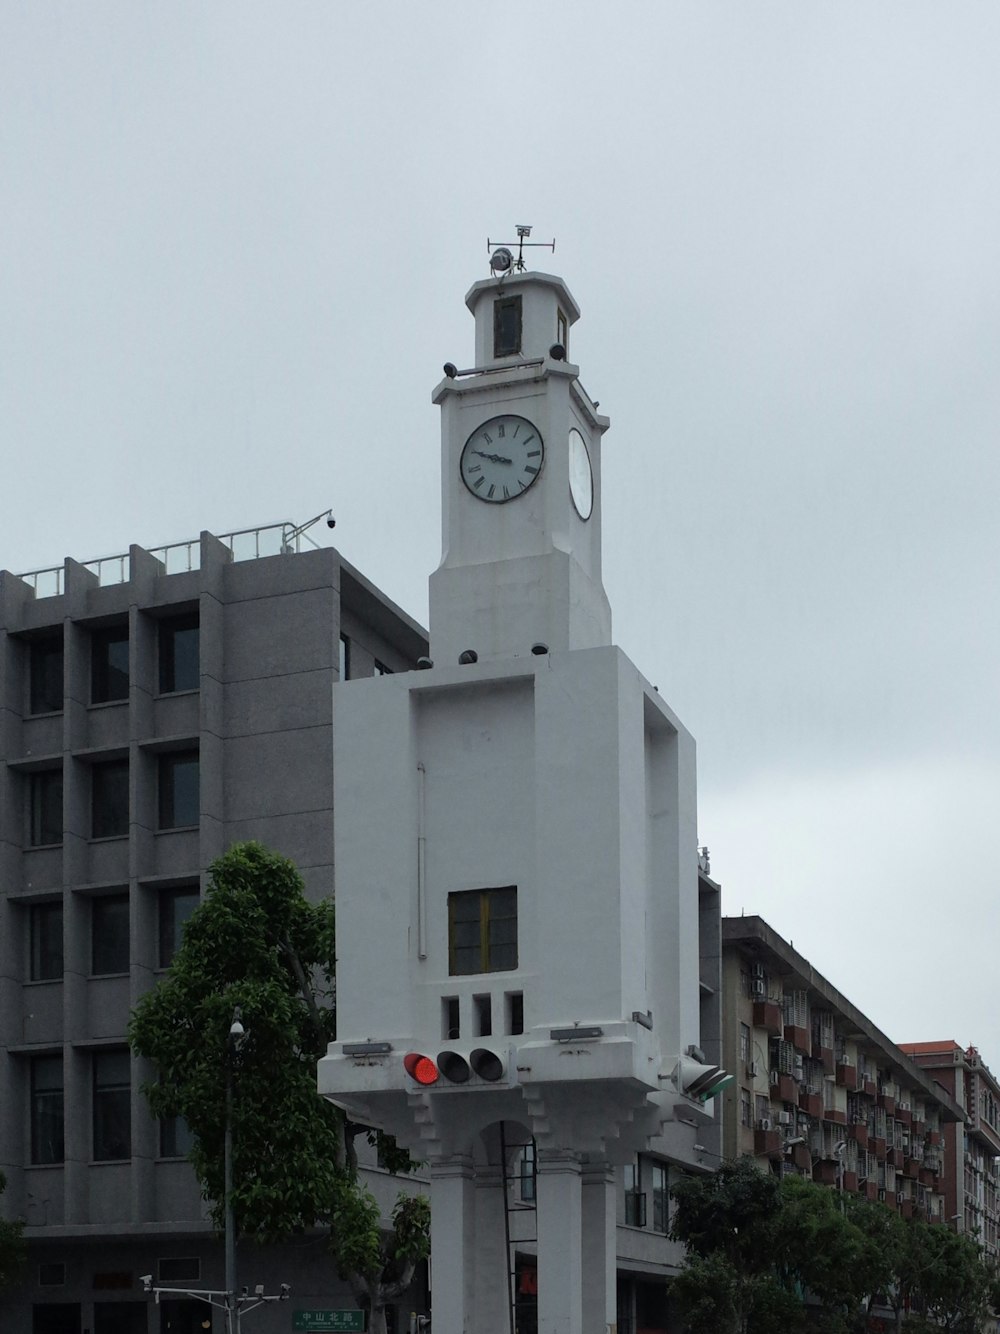 a large white clock tower in the middle of a city